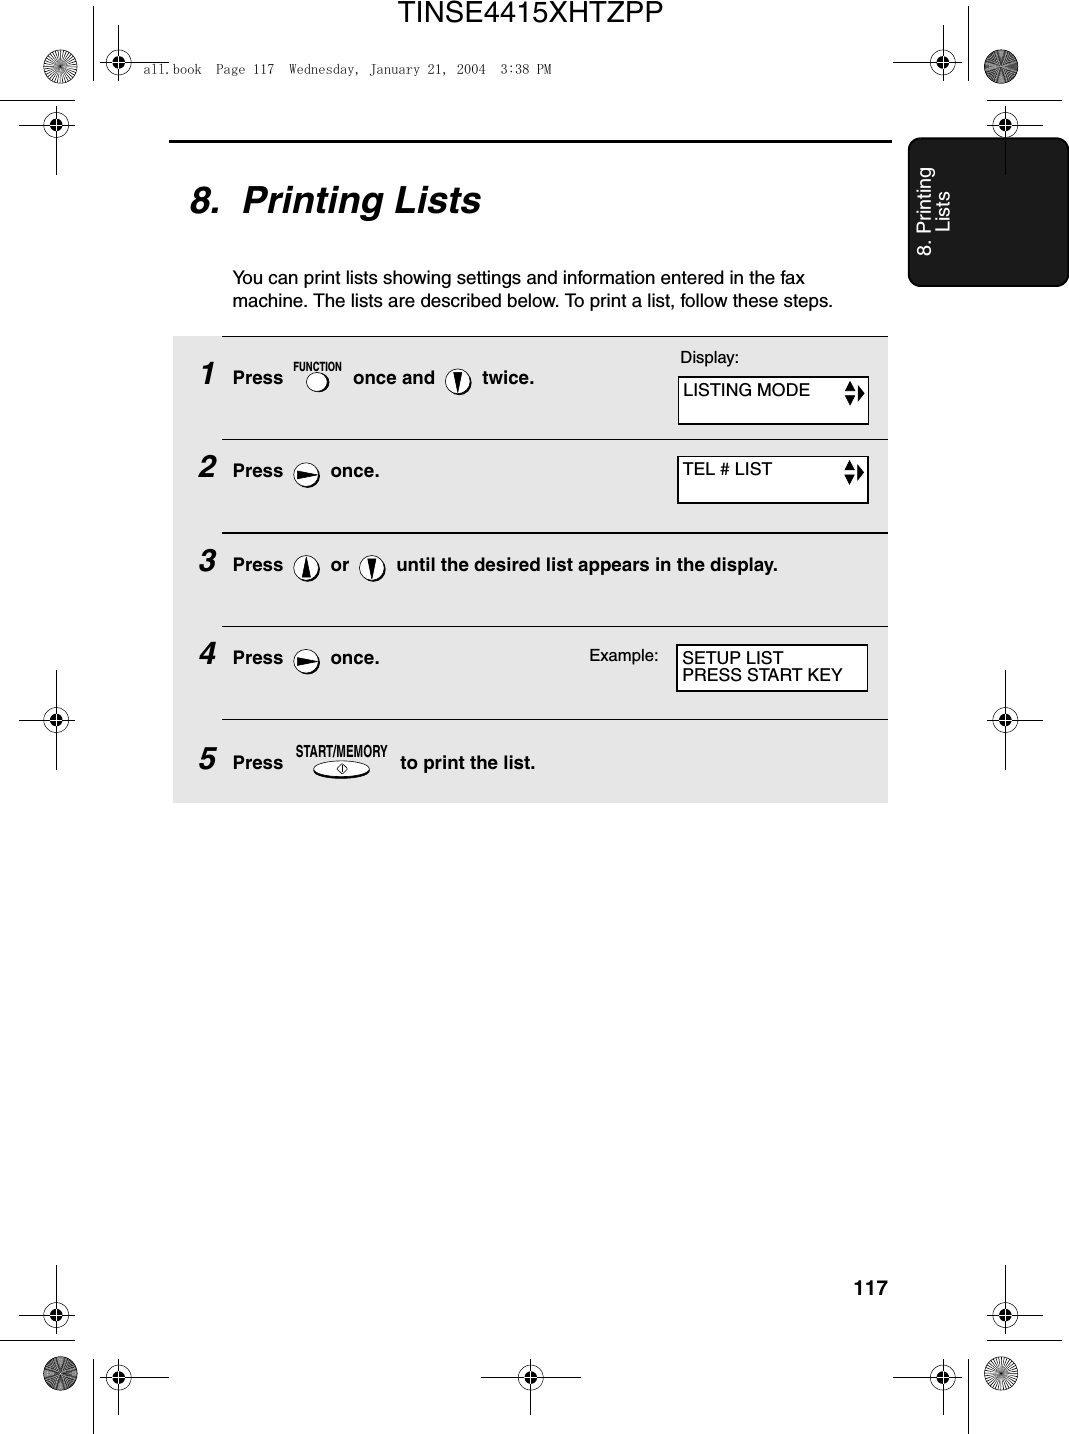 1178. Printing Lists8.  Printing ListsYou can print lists showing settings and information entered in the fax machine. The lists are described below. To print a list, follow these steps.1Press   once and   twice.2Press  once.3Press   or   until the desired list appears in the display.4Press  once.5Press   to print the list.FUNCTIONSTART/MEMORYDisplay:LISTING MODETEL # LISTSETUP LISTPRESS START KEYExample:all.book  Page 117  Wednesday, January 21, 2004  3:38 PMTINSE4415XHTZPP